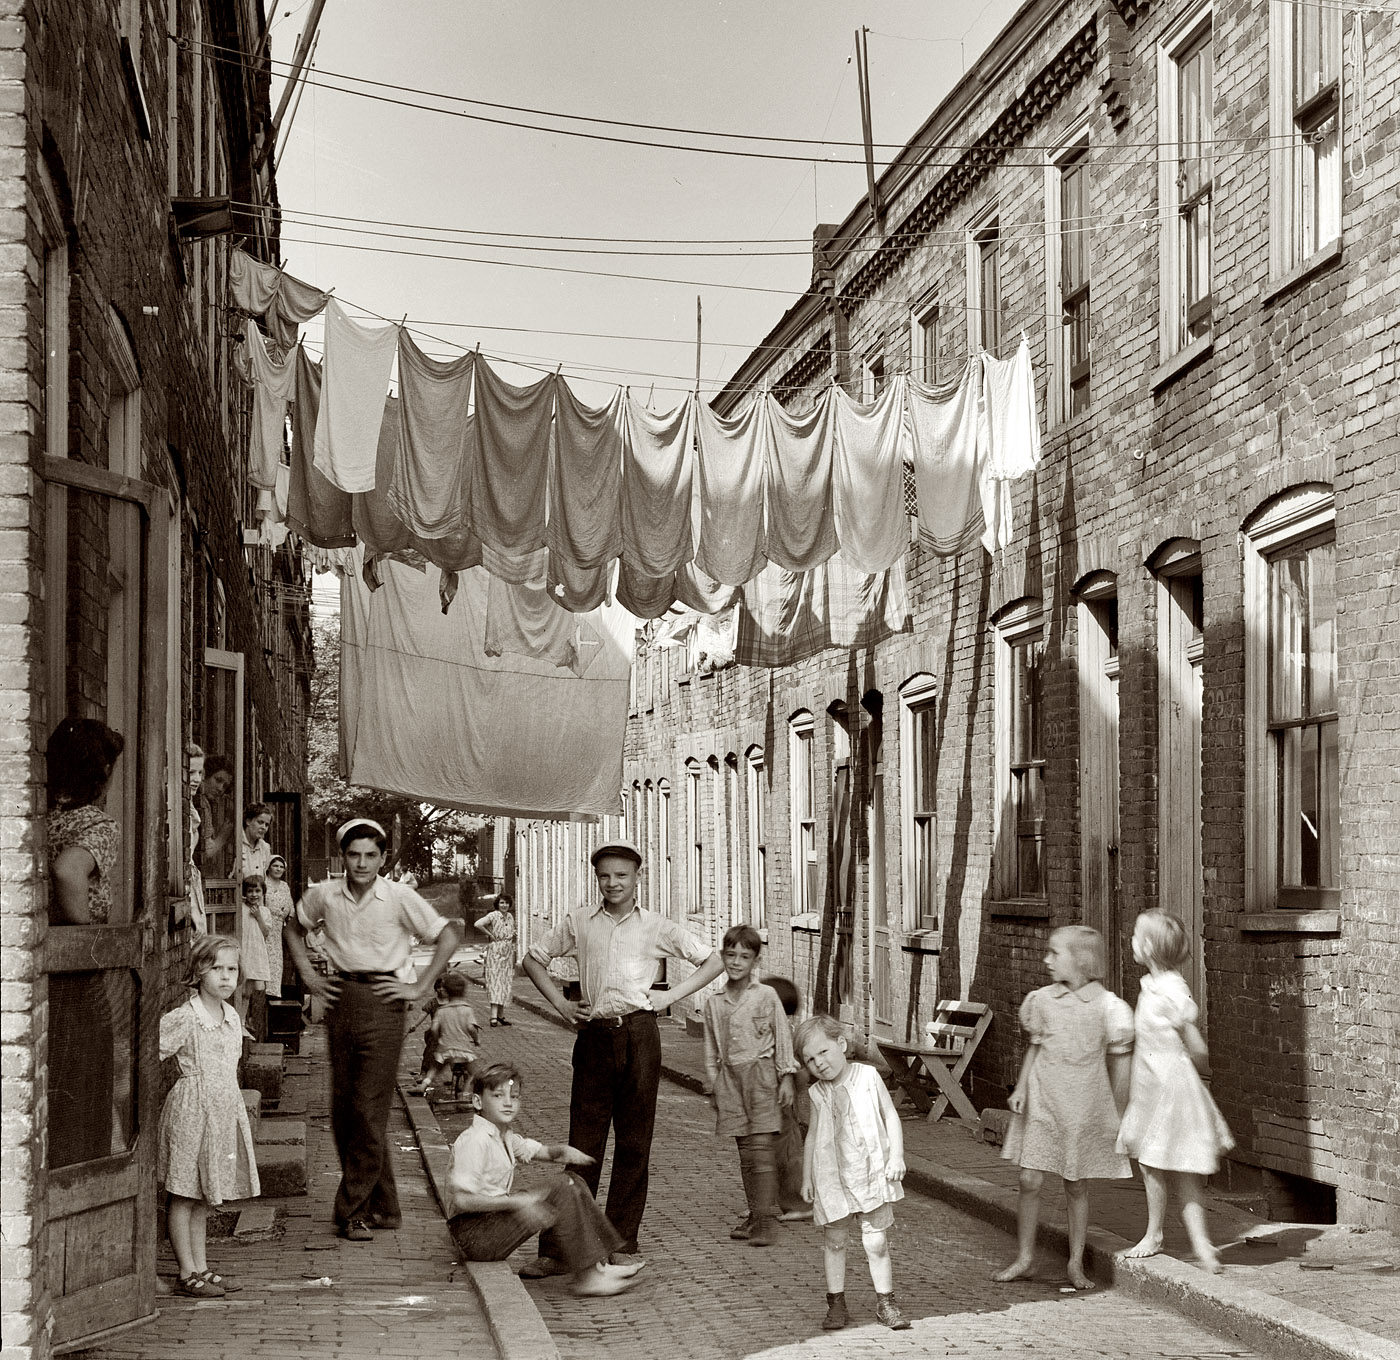 July 1938. Another view of "housing conditions in Ambridge, Pennsylvania, home of the American Bridge Company." View full size. Photo by Arthur Rothstein. While I guess the point here is the decrepit nature of the neighborhood, it looks to have been a great place to grow up. Like something from a Neil Simon play.